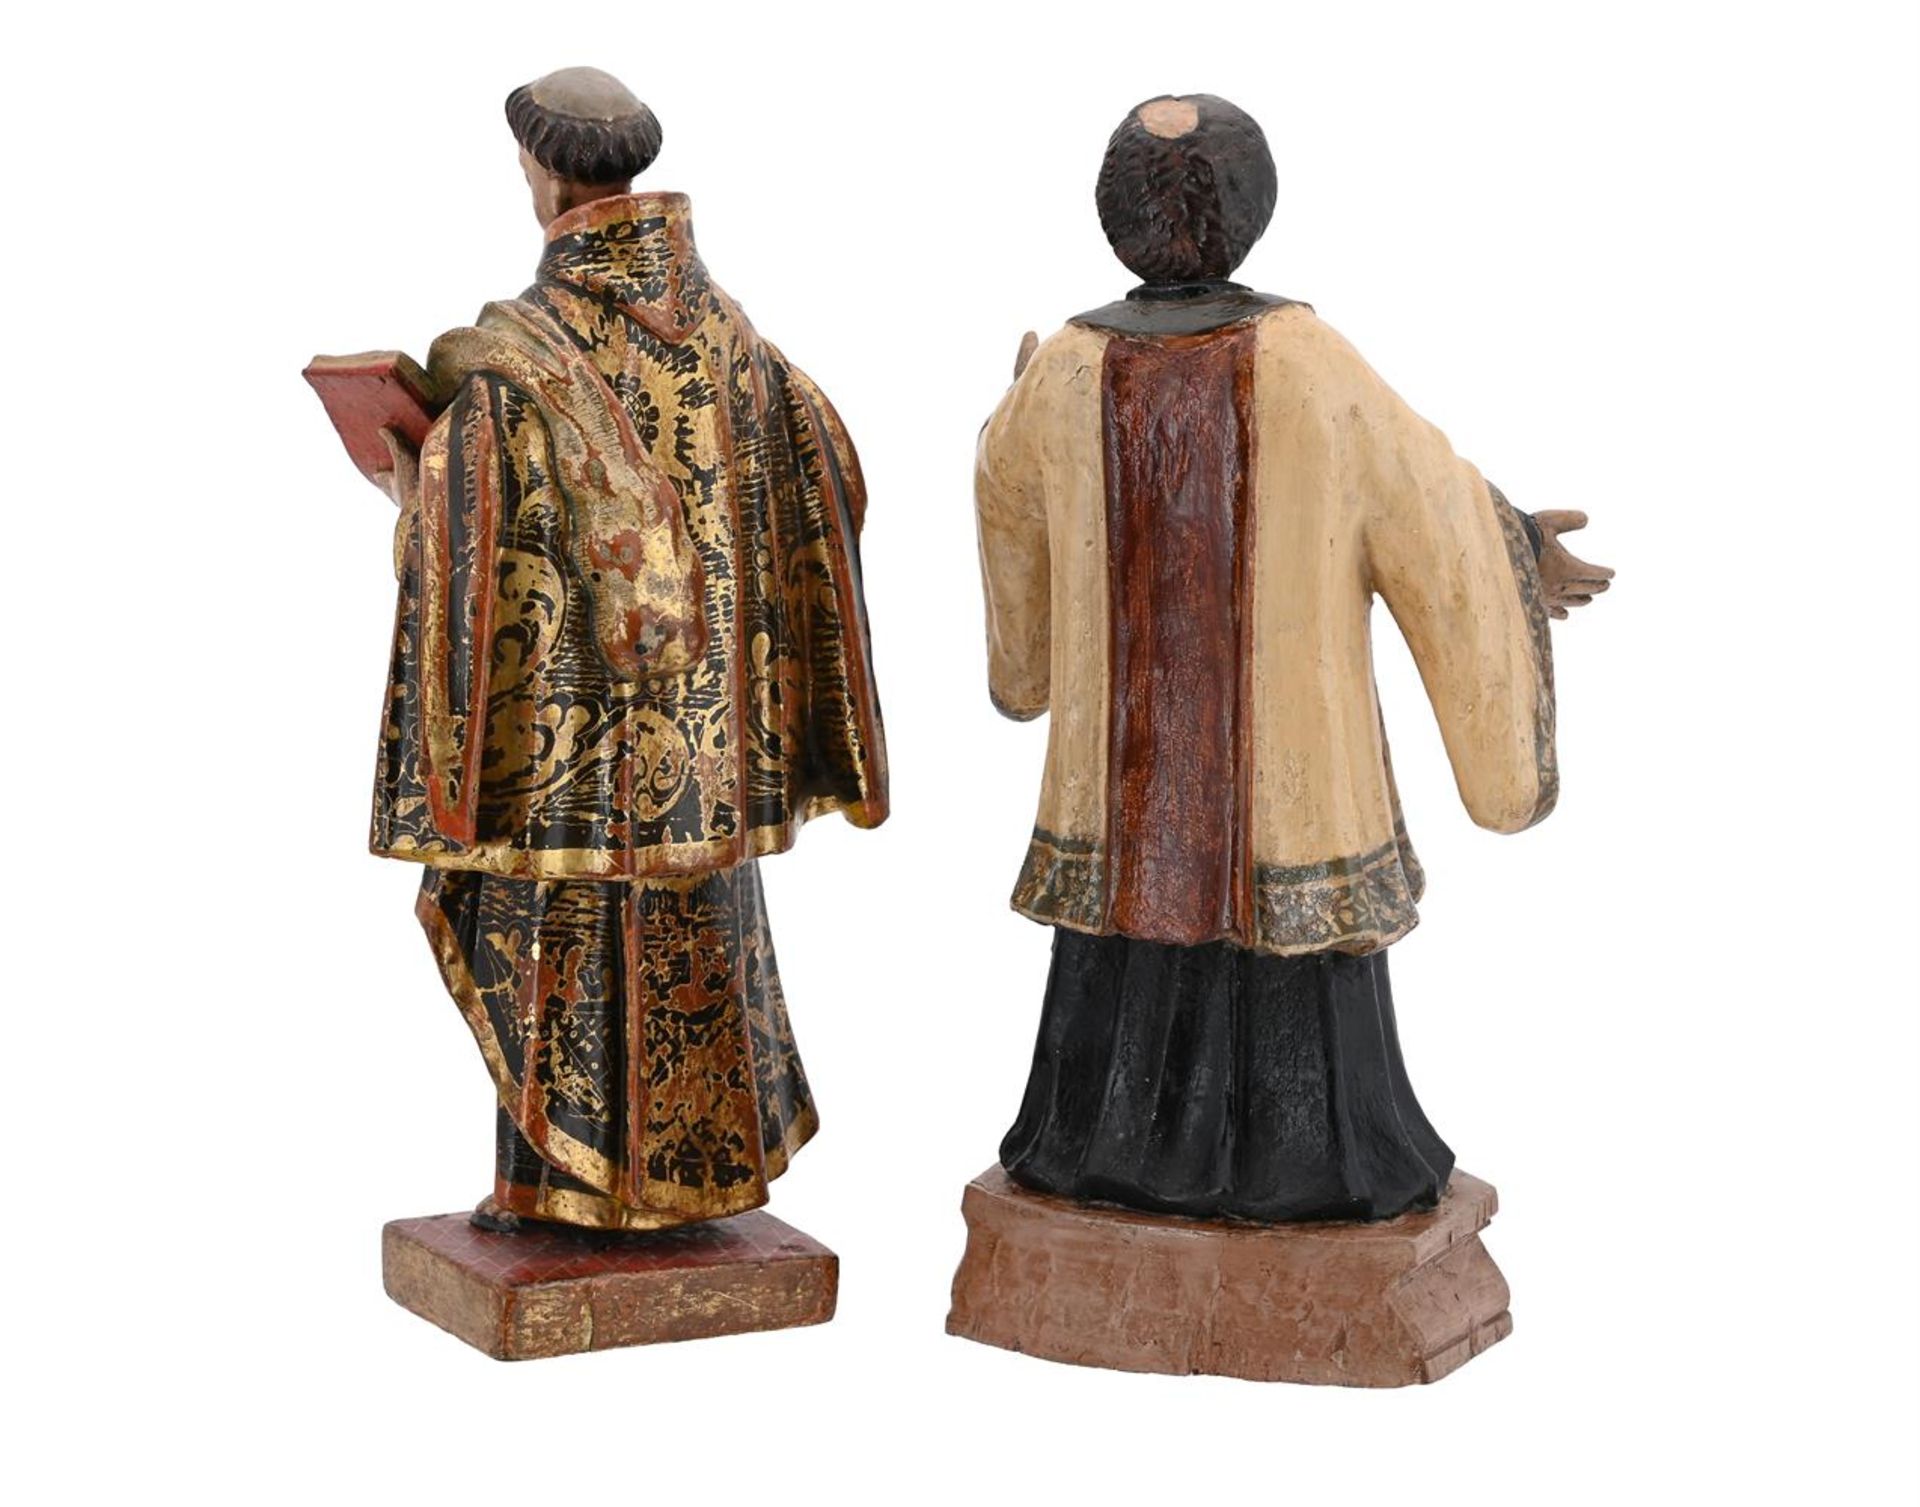 TWO CARVED AND POLYCHROME DECORATED WOOD MODELS OF CATHOLIC RELIGIOUS FIGURES - Image 2 of 2